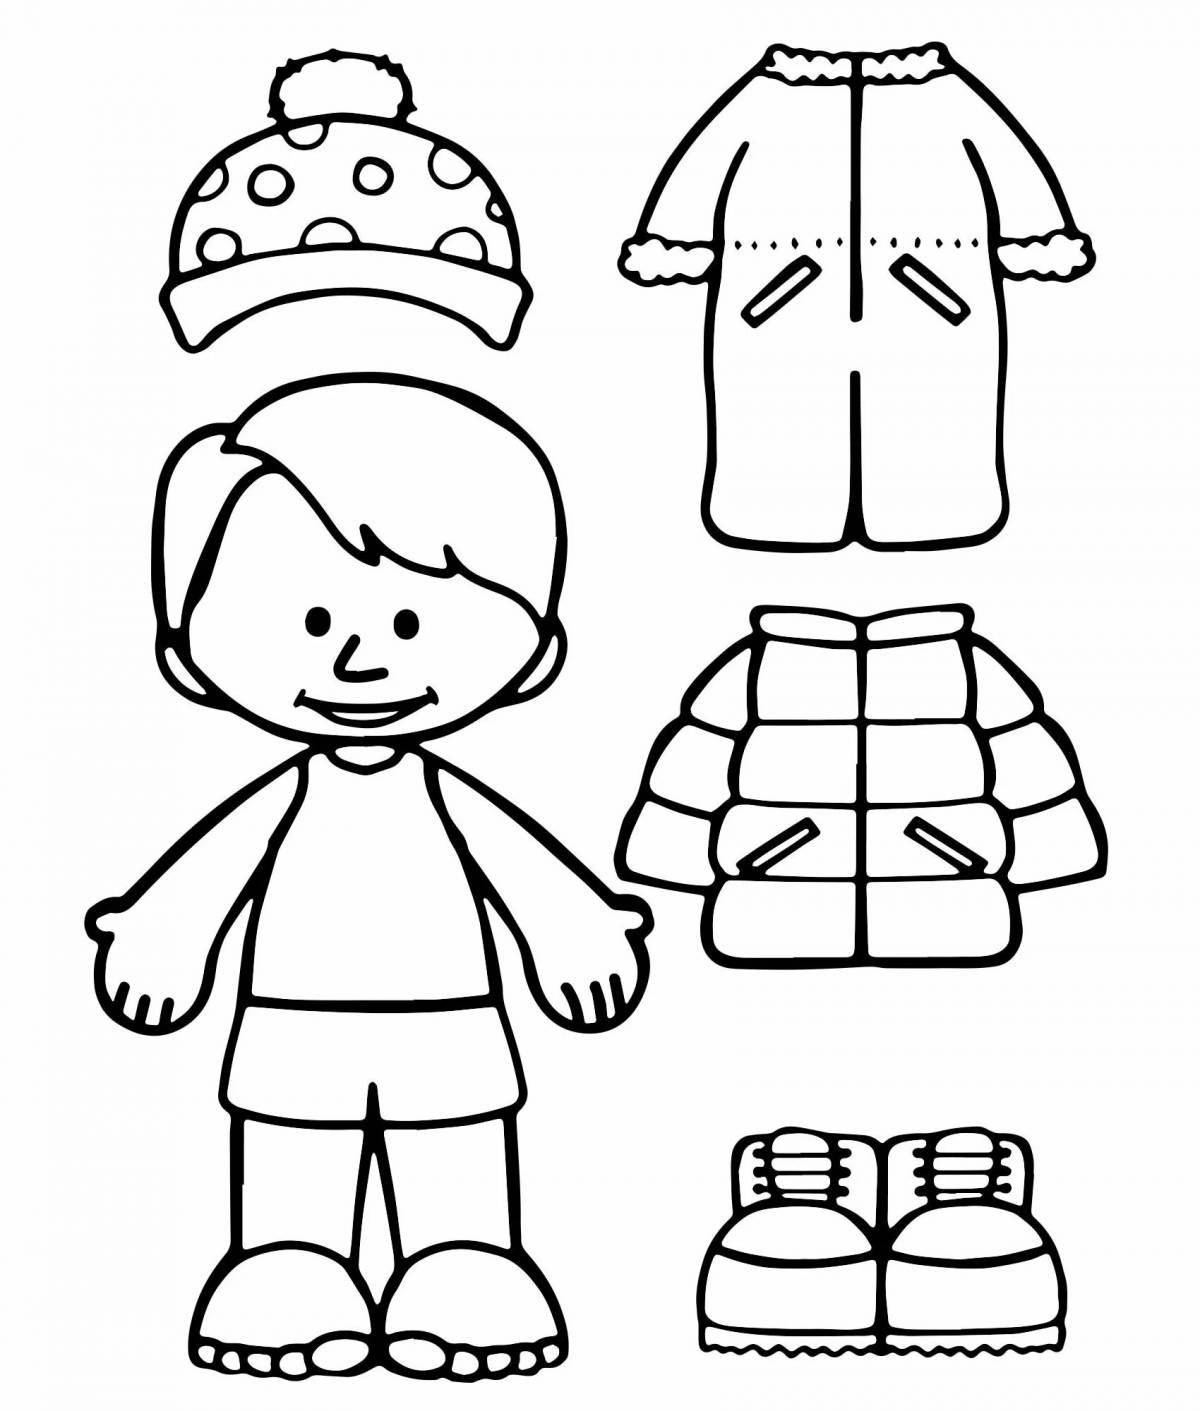 Sweet winter clothes coloring book for 5-6 year olds